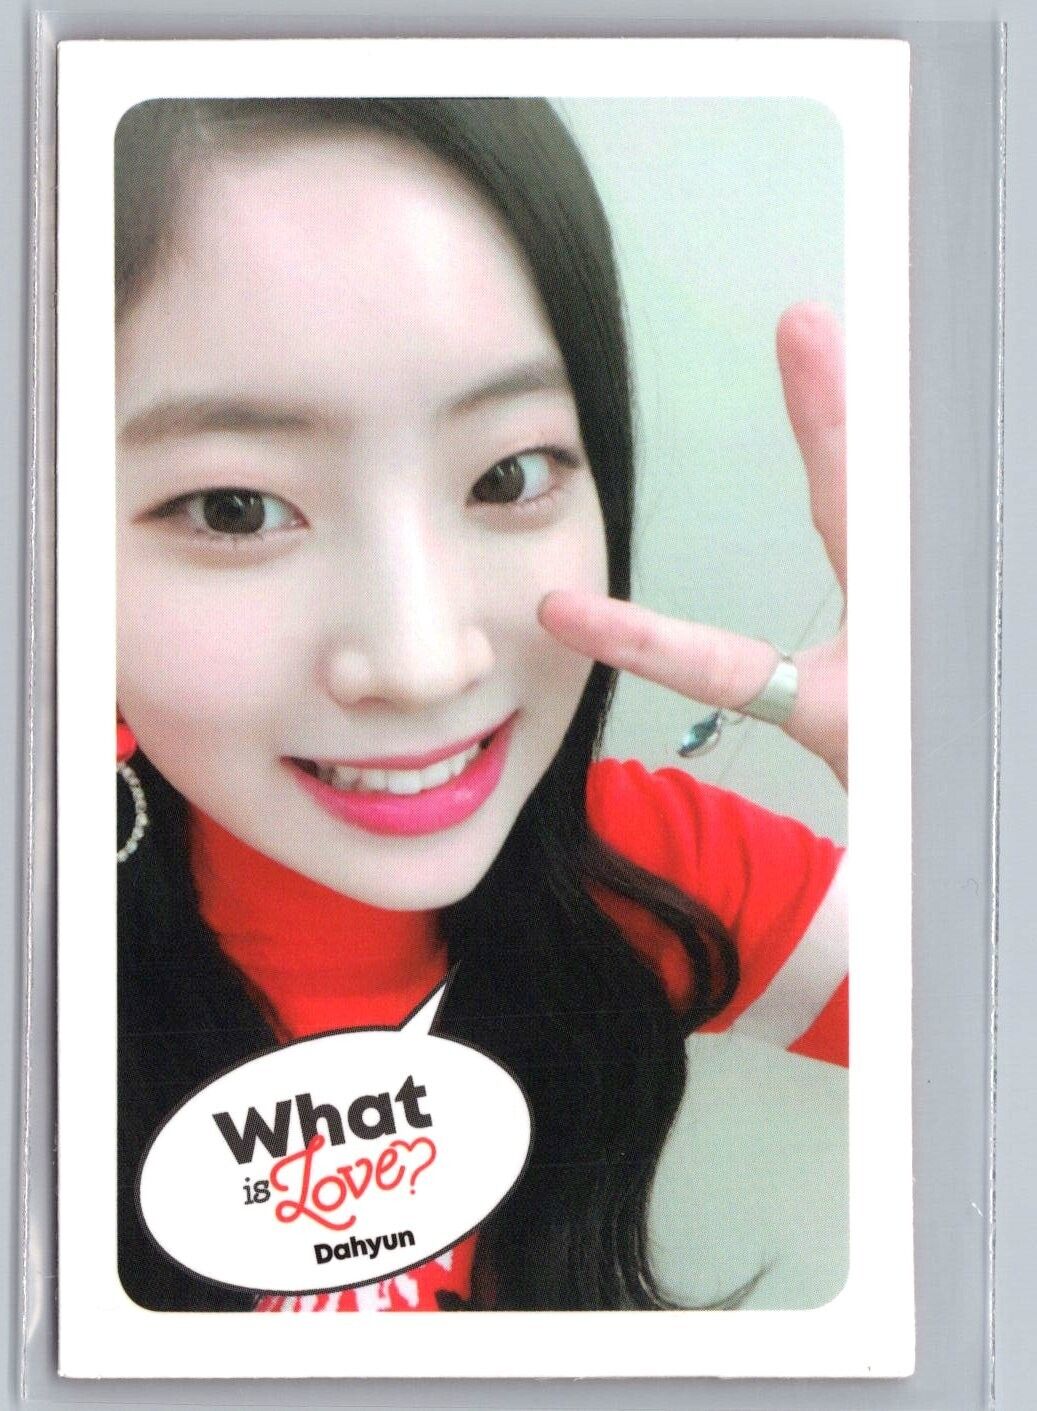 TWICE- DAHYUN WHAT IS LOVE OFFICIAL ALBUM PHOTOCARD (US SELLER)